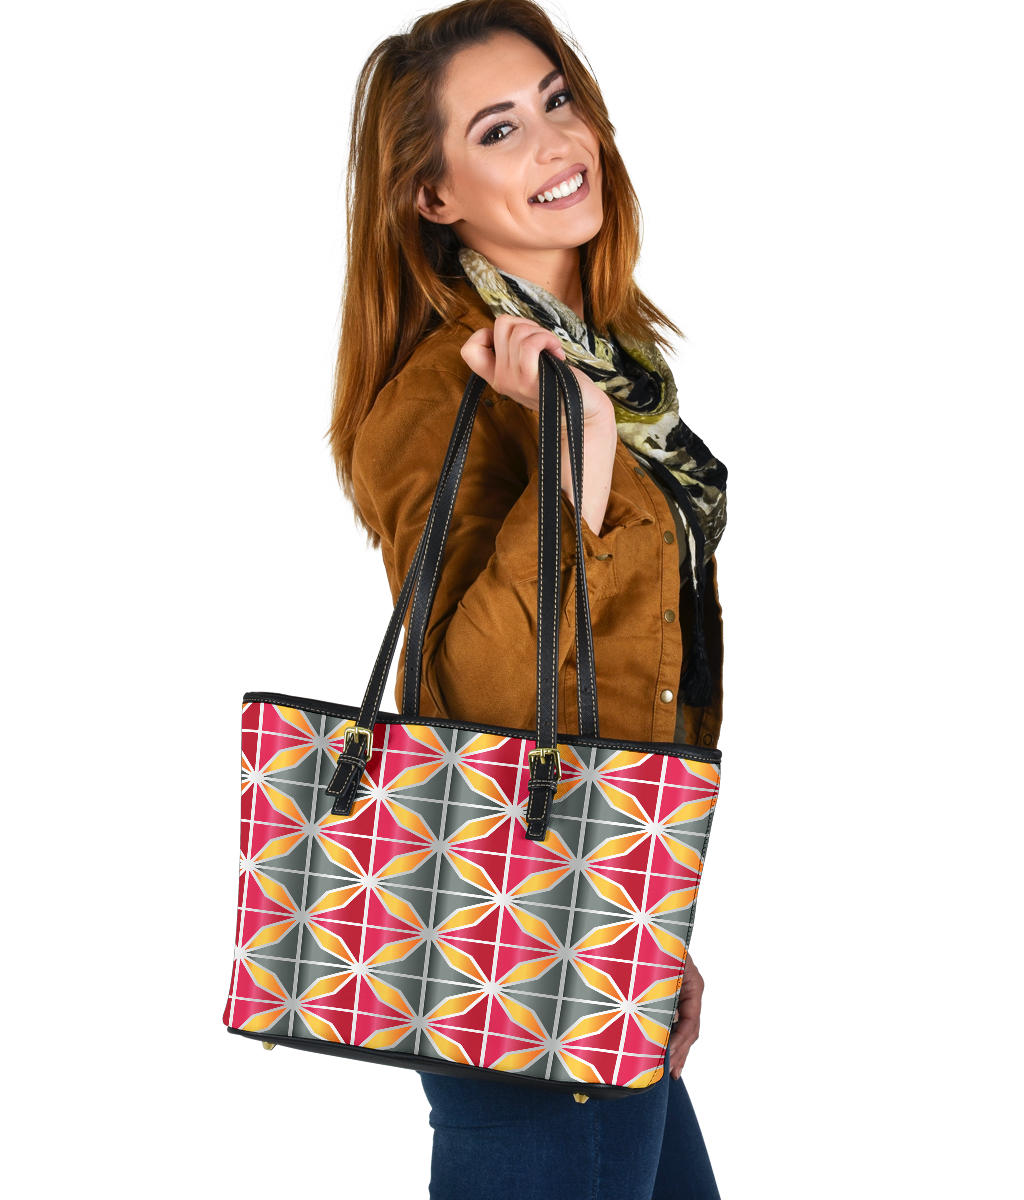 small leather tote bag with a gray, pink and orange geometric design